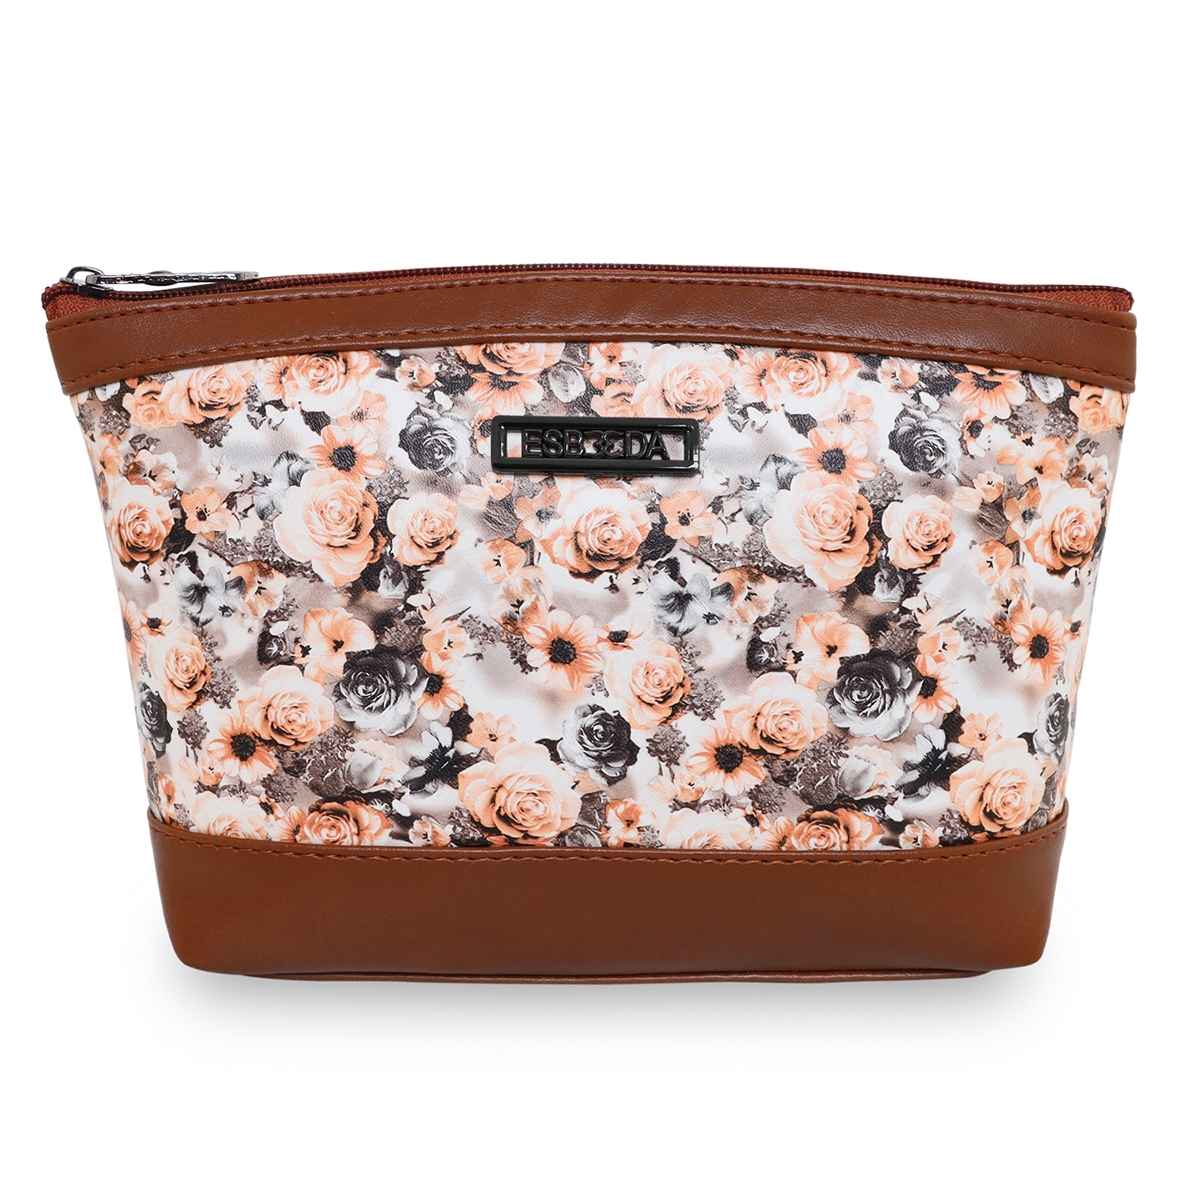 ESBEDA | ESBEDA Tan Color Floral Print Pouch For Women Pack of 2 1